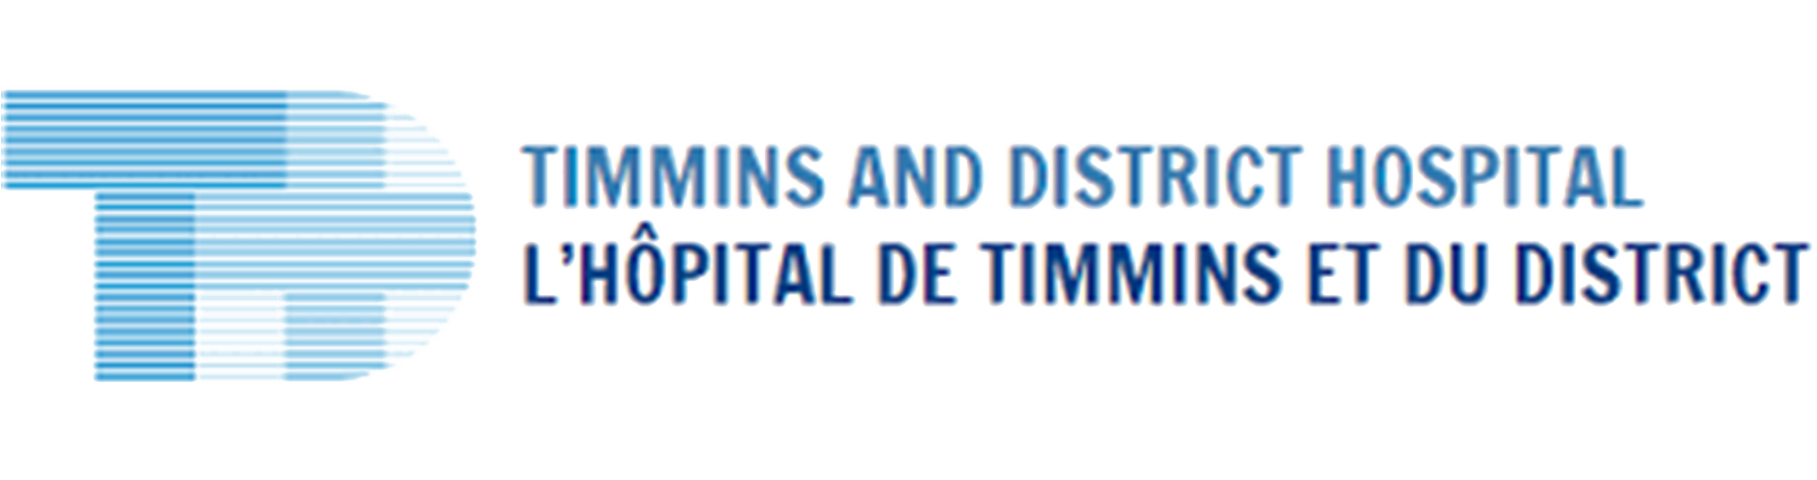 Timmins and Distruct Hospital